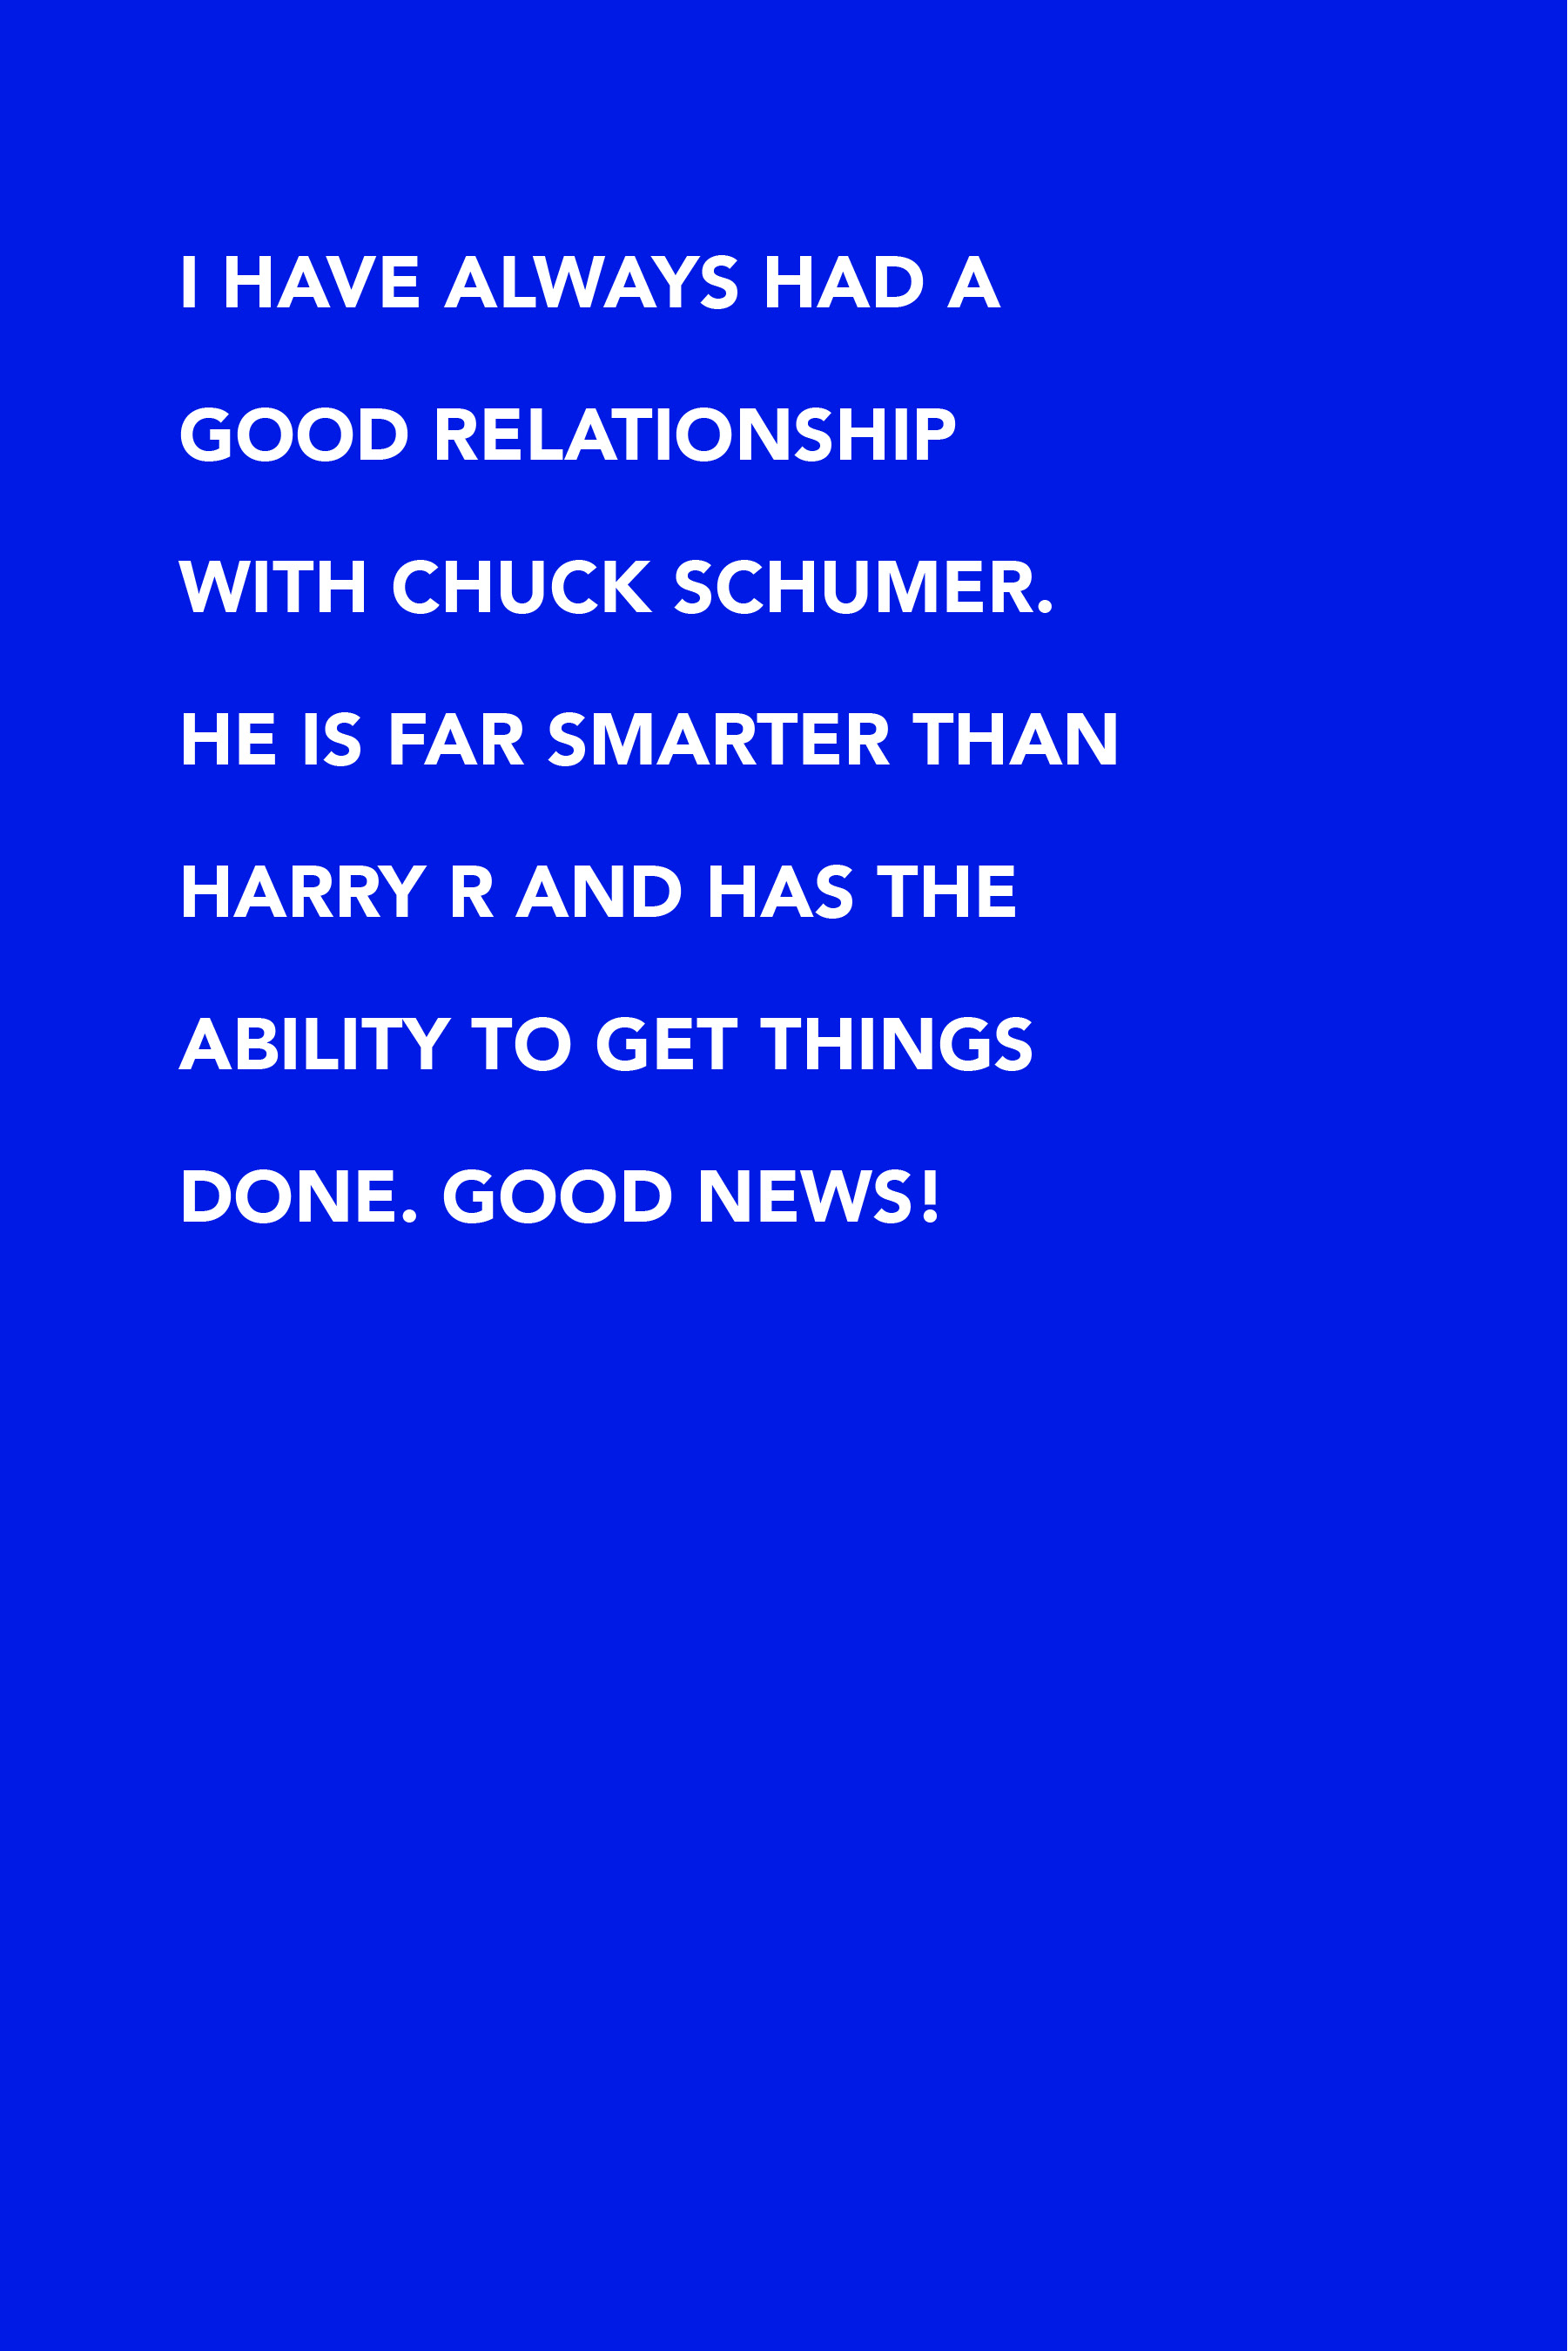 I have always had a good relationship with Chuck Schumer. He is far smarter than Harry R and has the ability to get things done. Good news!